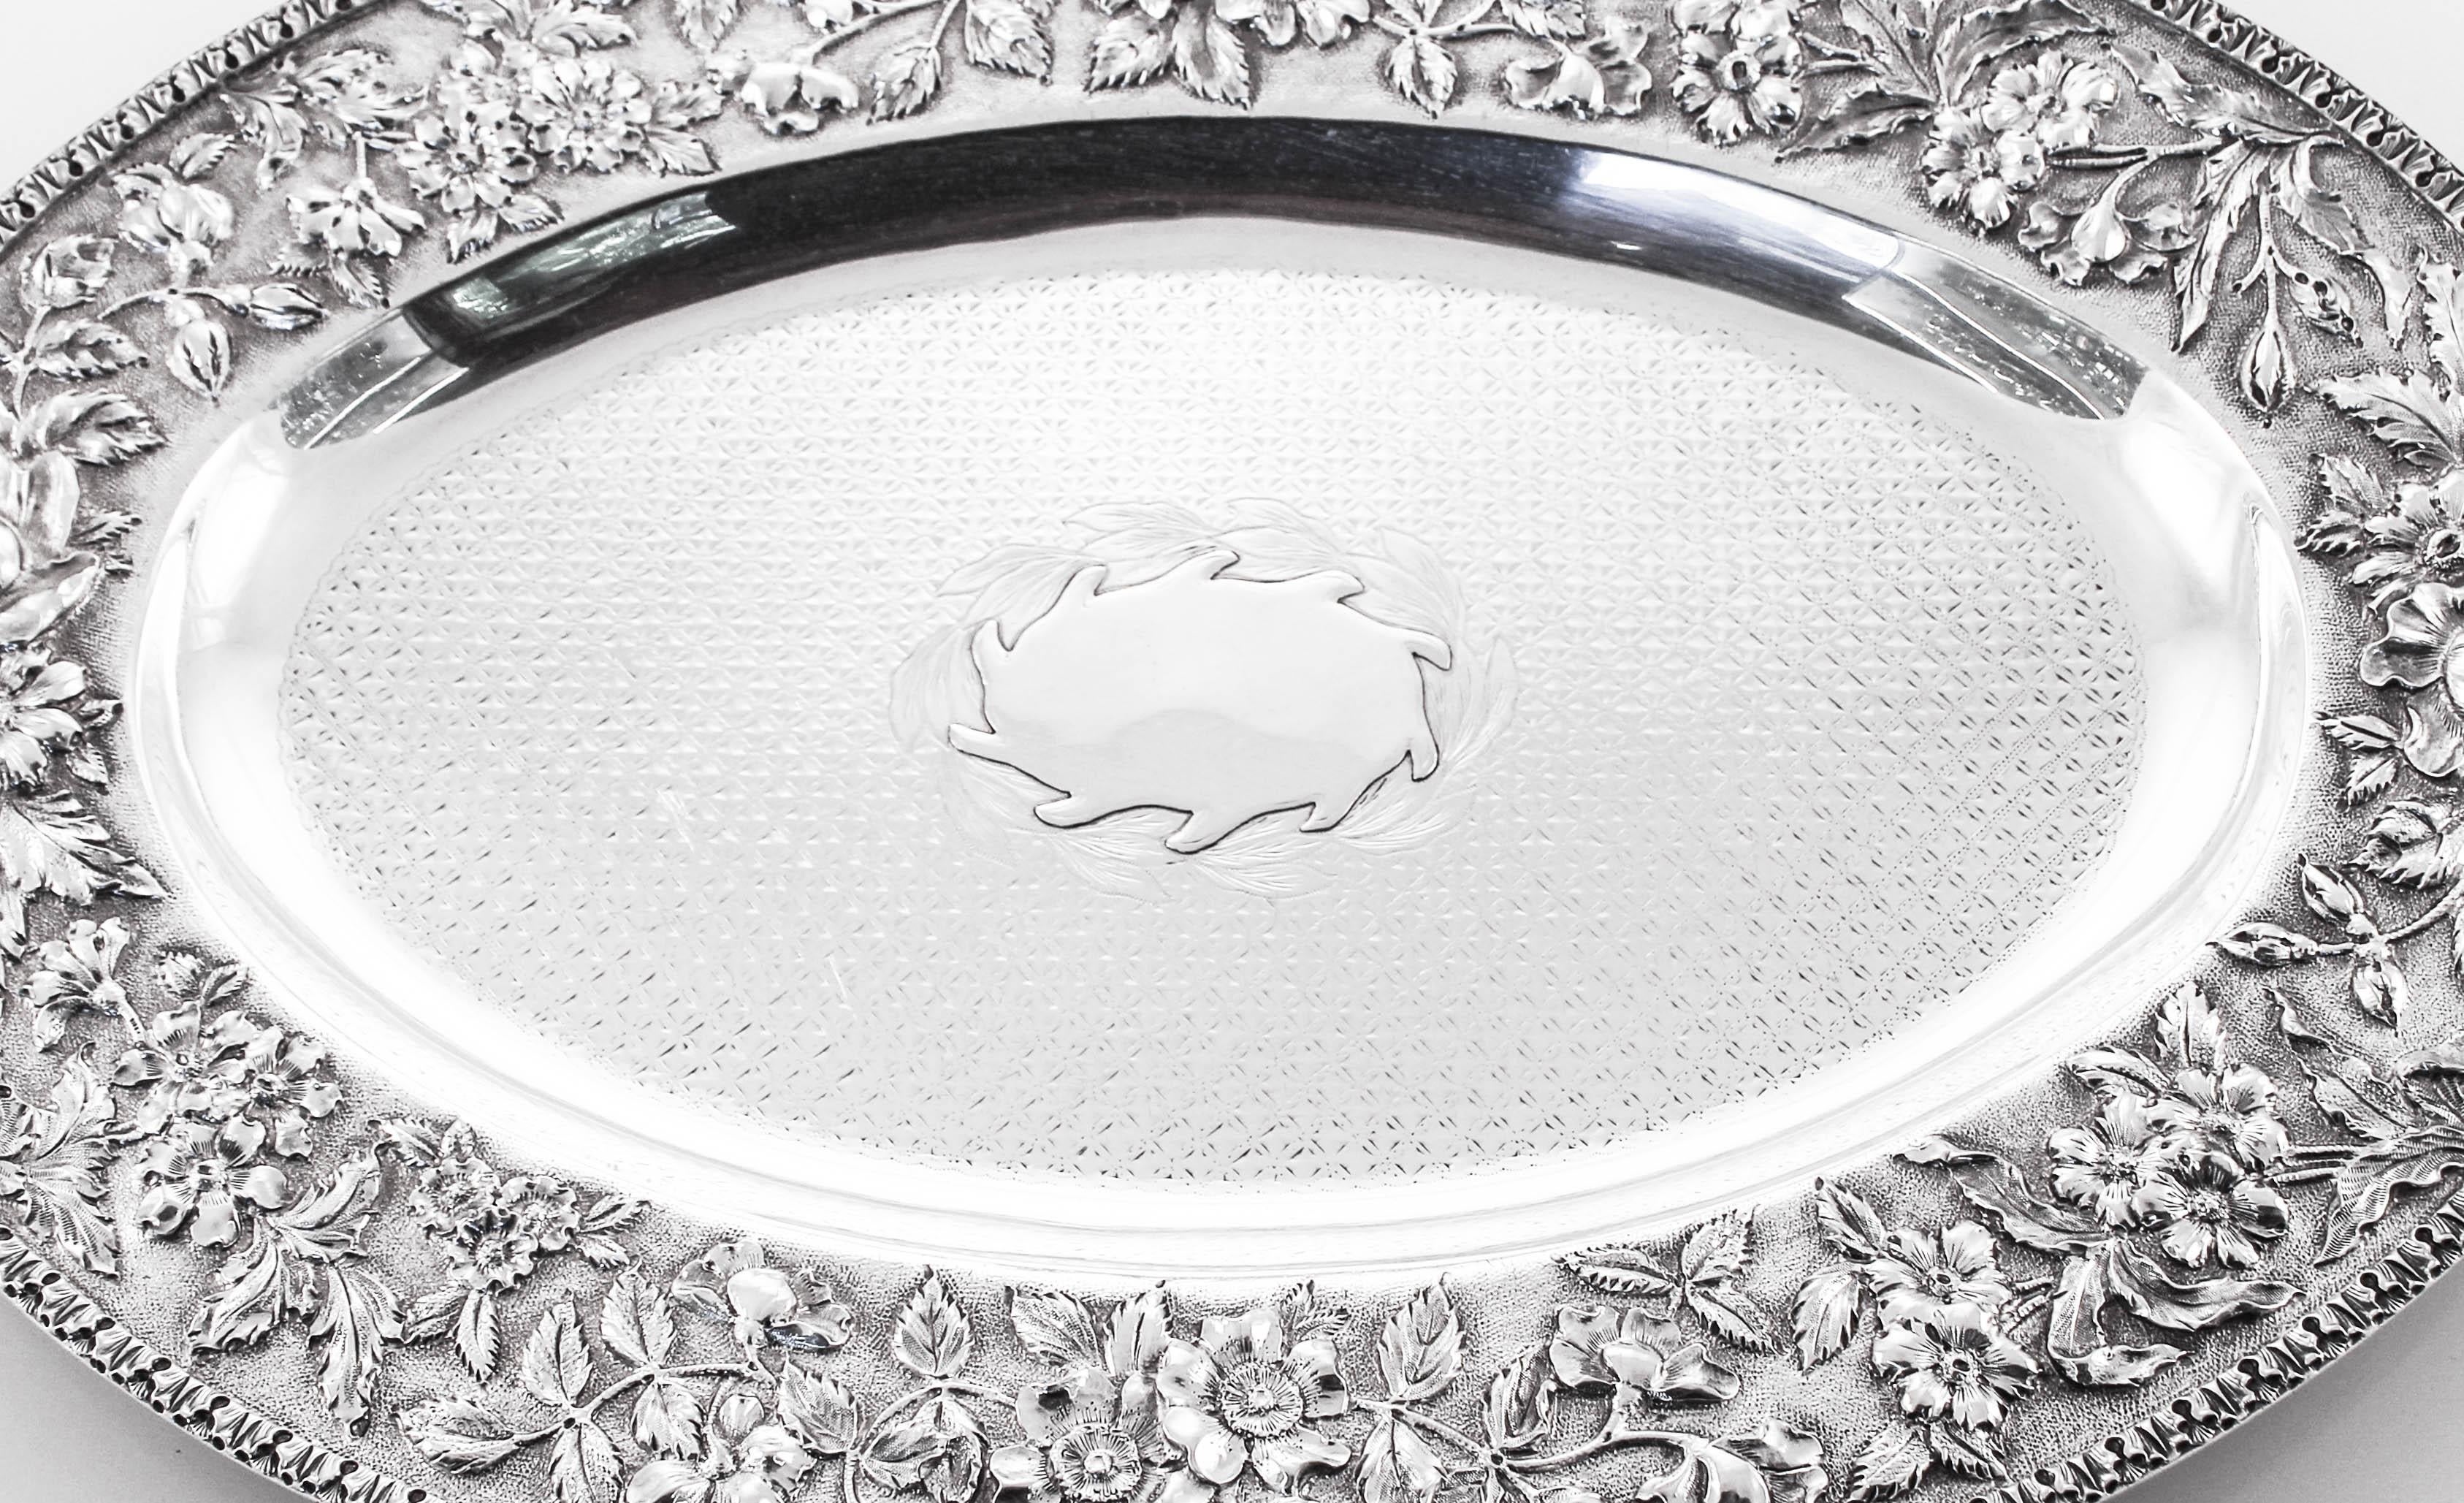 We are proud to offer this antique sterling silver platter by the renowned silver company, S. Kirk and Sons, Maryland. Kirk’s tradition for fine craftsmanship has brought many famous people to its shop. It is not surprising that when the White House